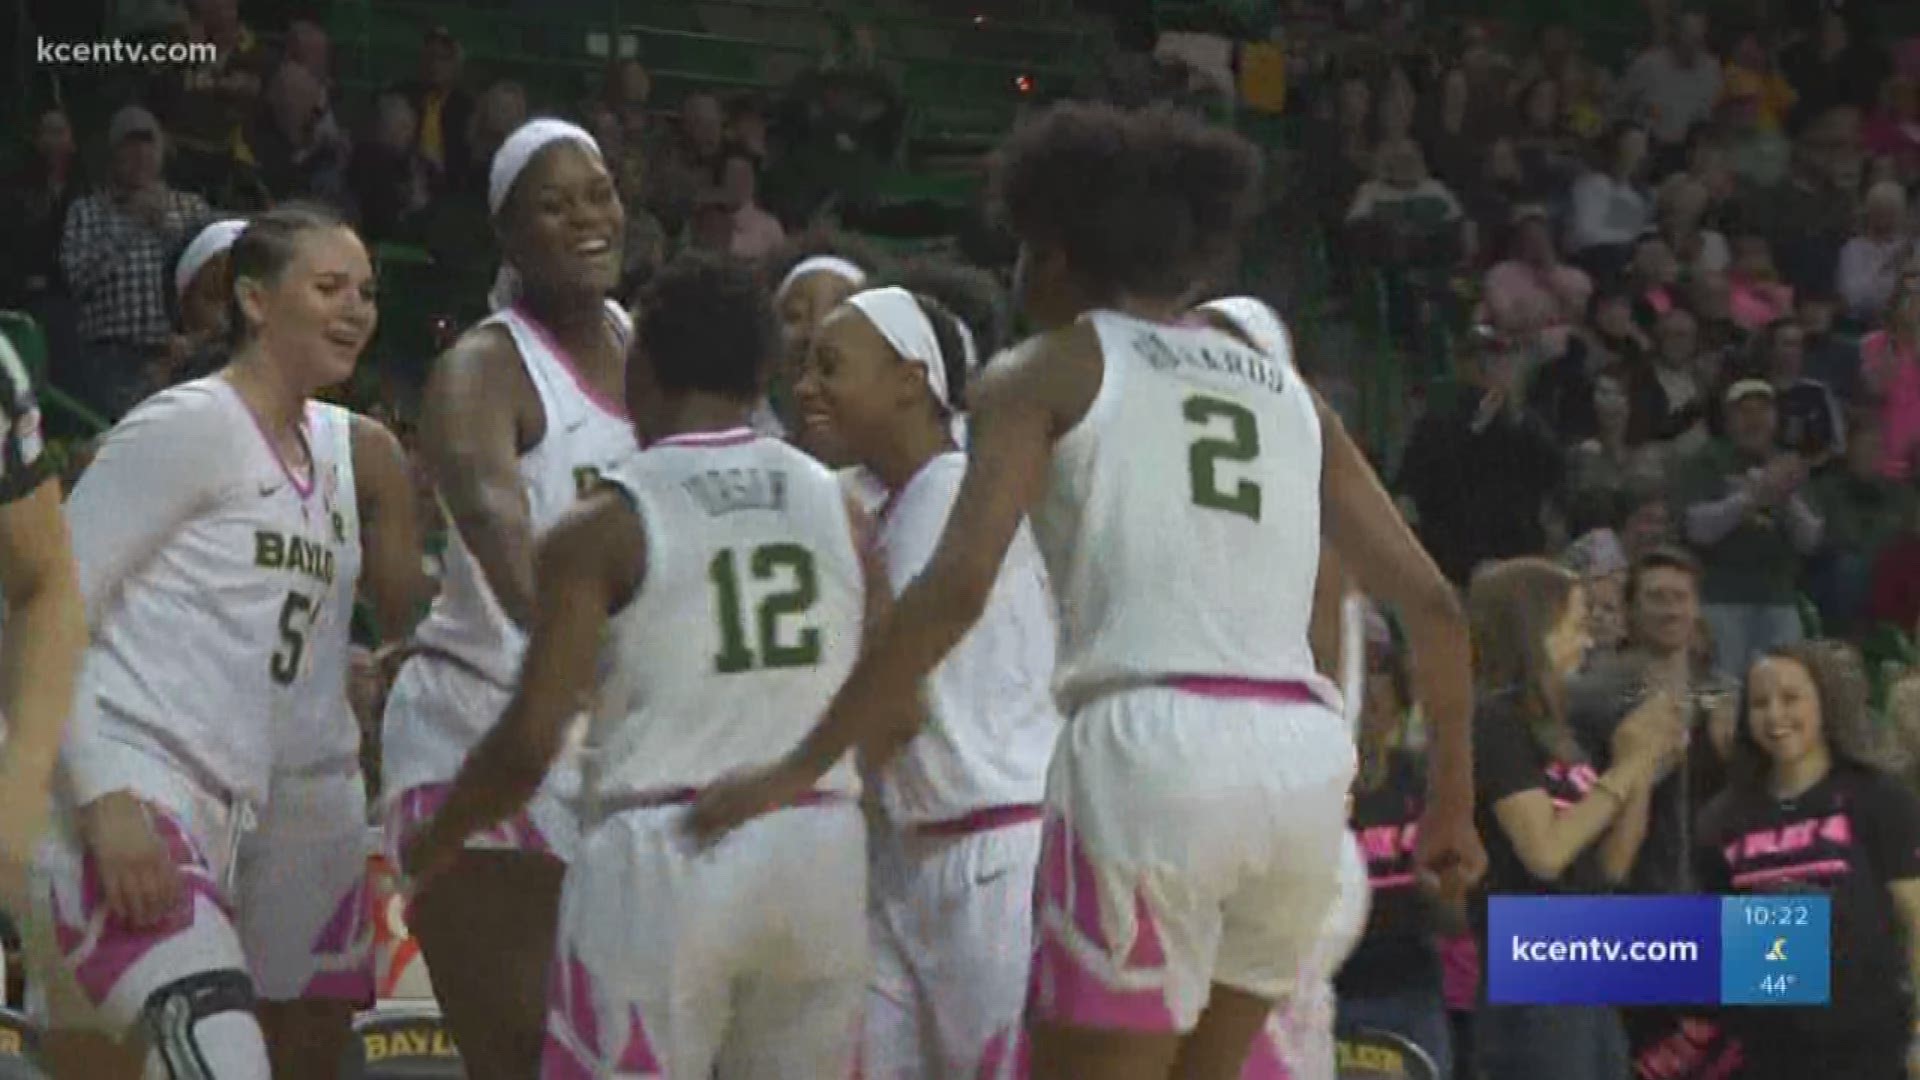 The No. 1 Baylor Lady Bears secured their 36th straight Big 12 win with a 87-53 win over Oklahoma.